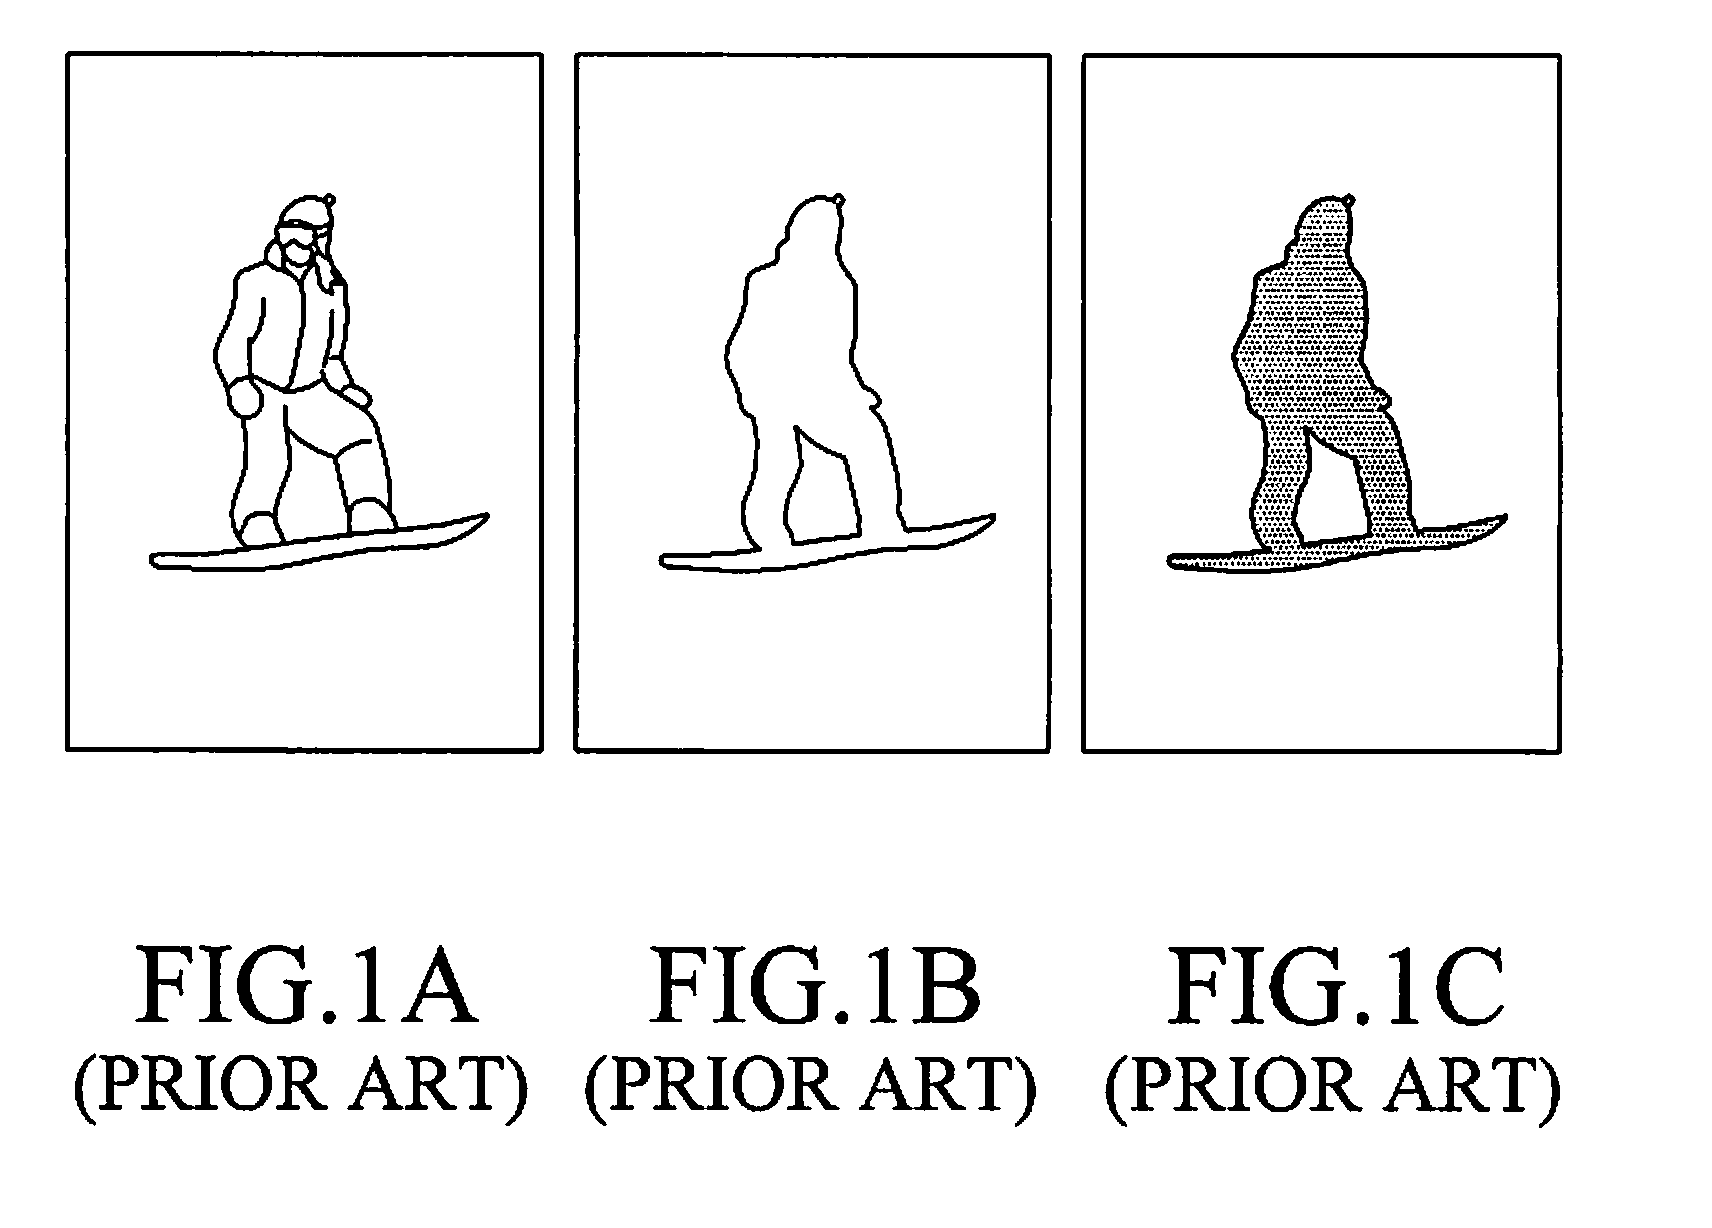 Image inpainting apparatus and method using restricted search region